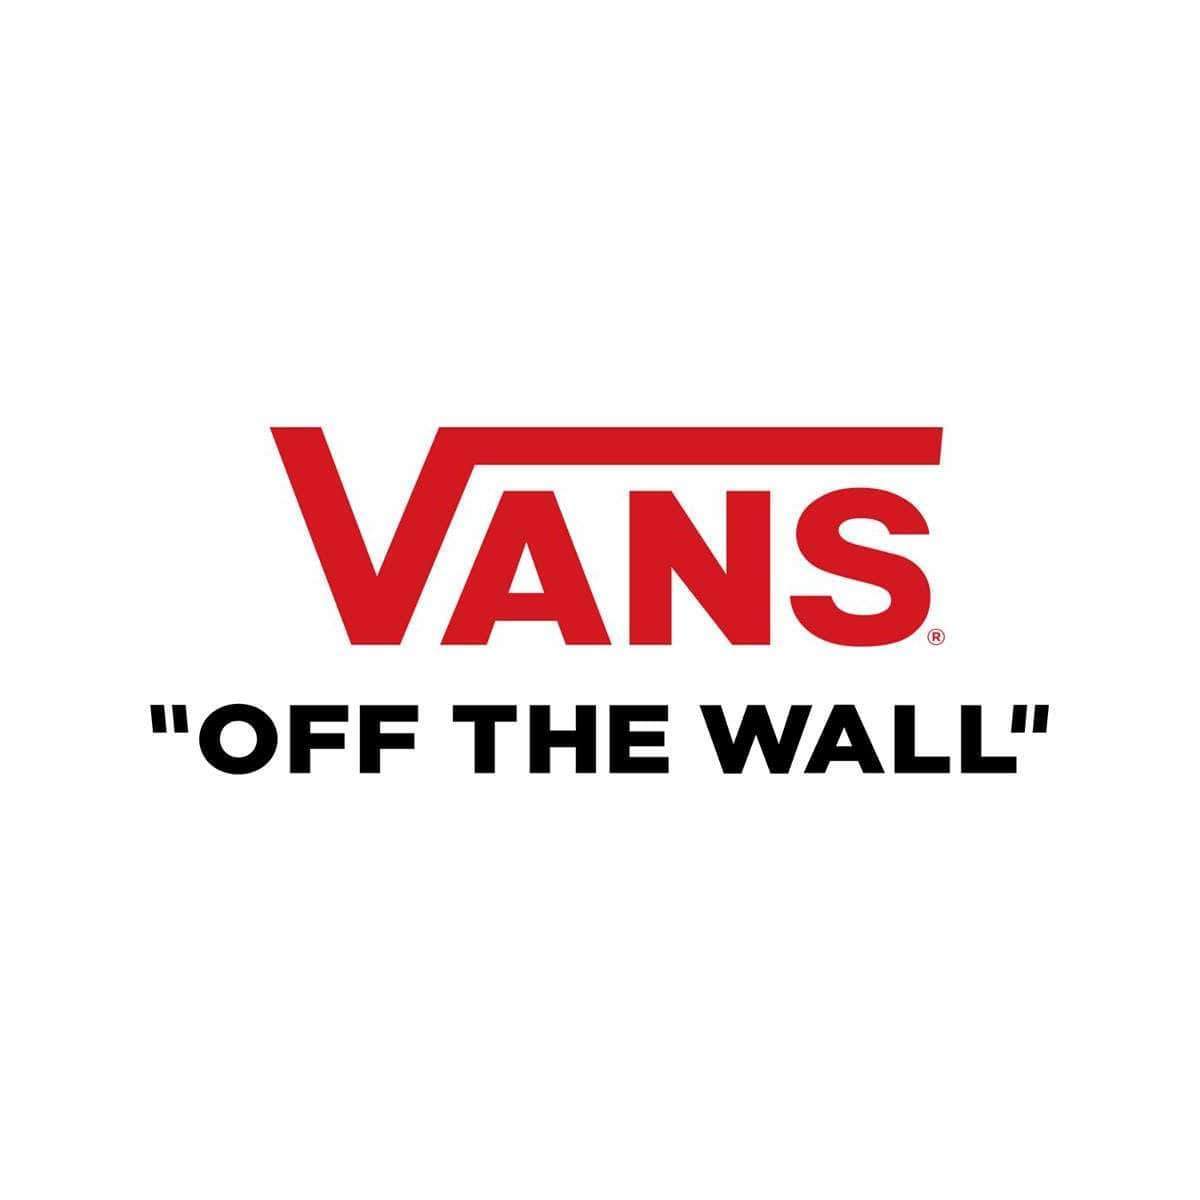 Small Vans Logo - Flying Man Small Vans Classic Slip On Sneakers. Shop Online Now